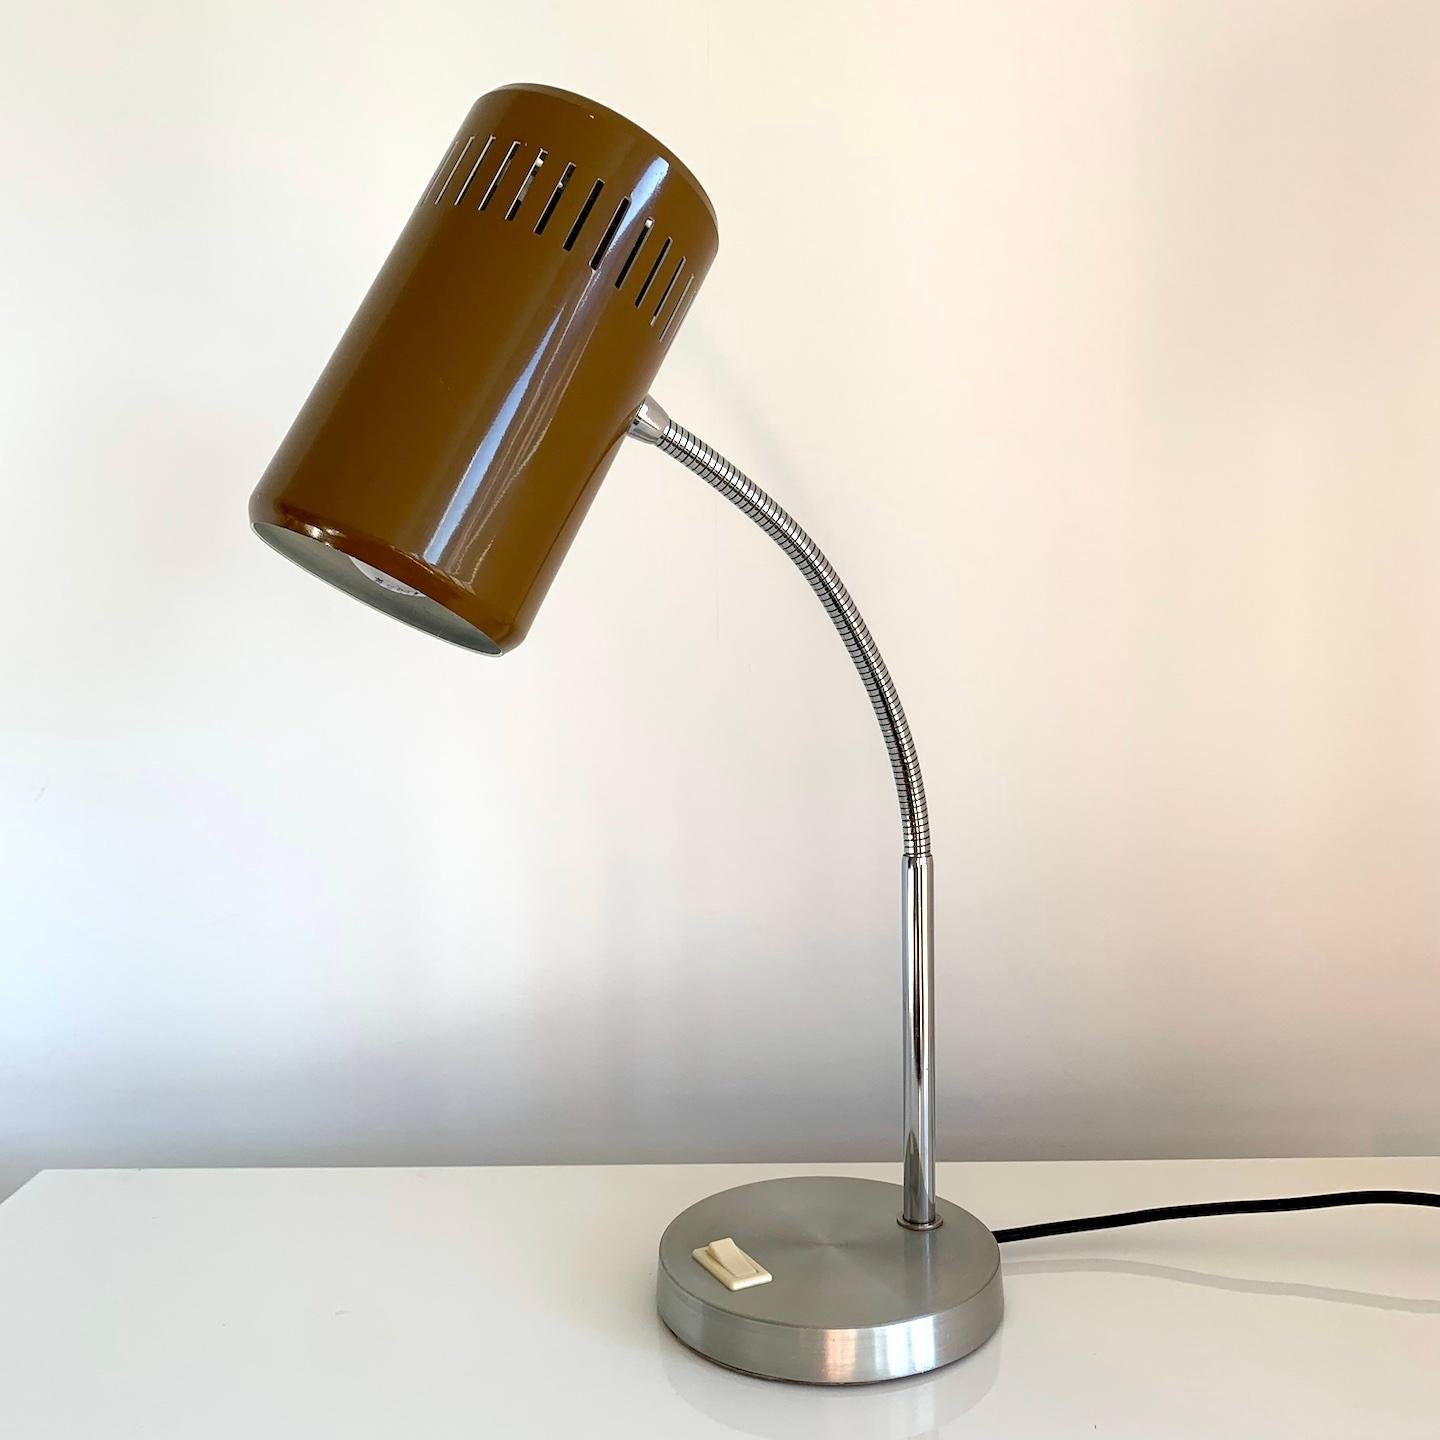 Mid-century desk lamp italian 1970s. Overall excellent vintage condition, the shade has a nice shape and color, circa 1970s. The lamp has been checked and is working correctly with an earthed uk plug fitted. Sizing approx: Shade 10x17 cm. Height: